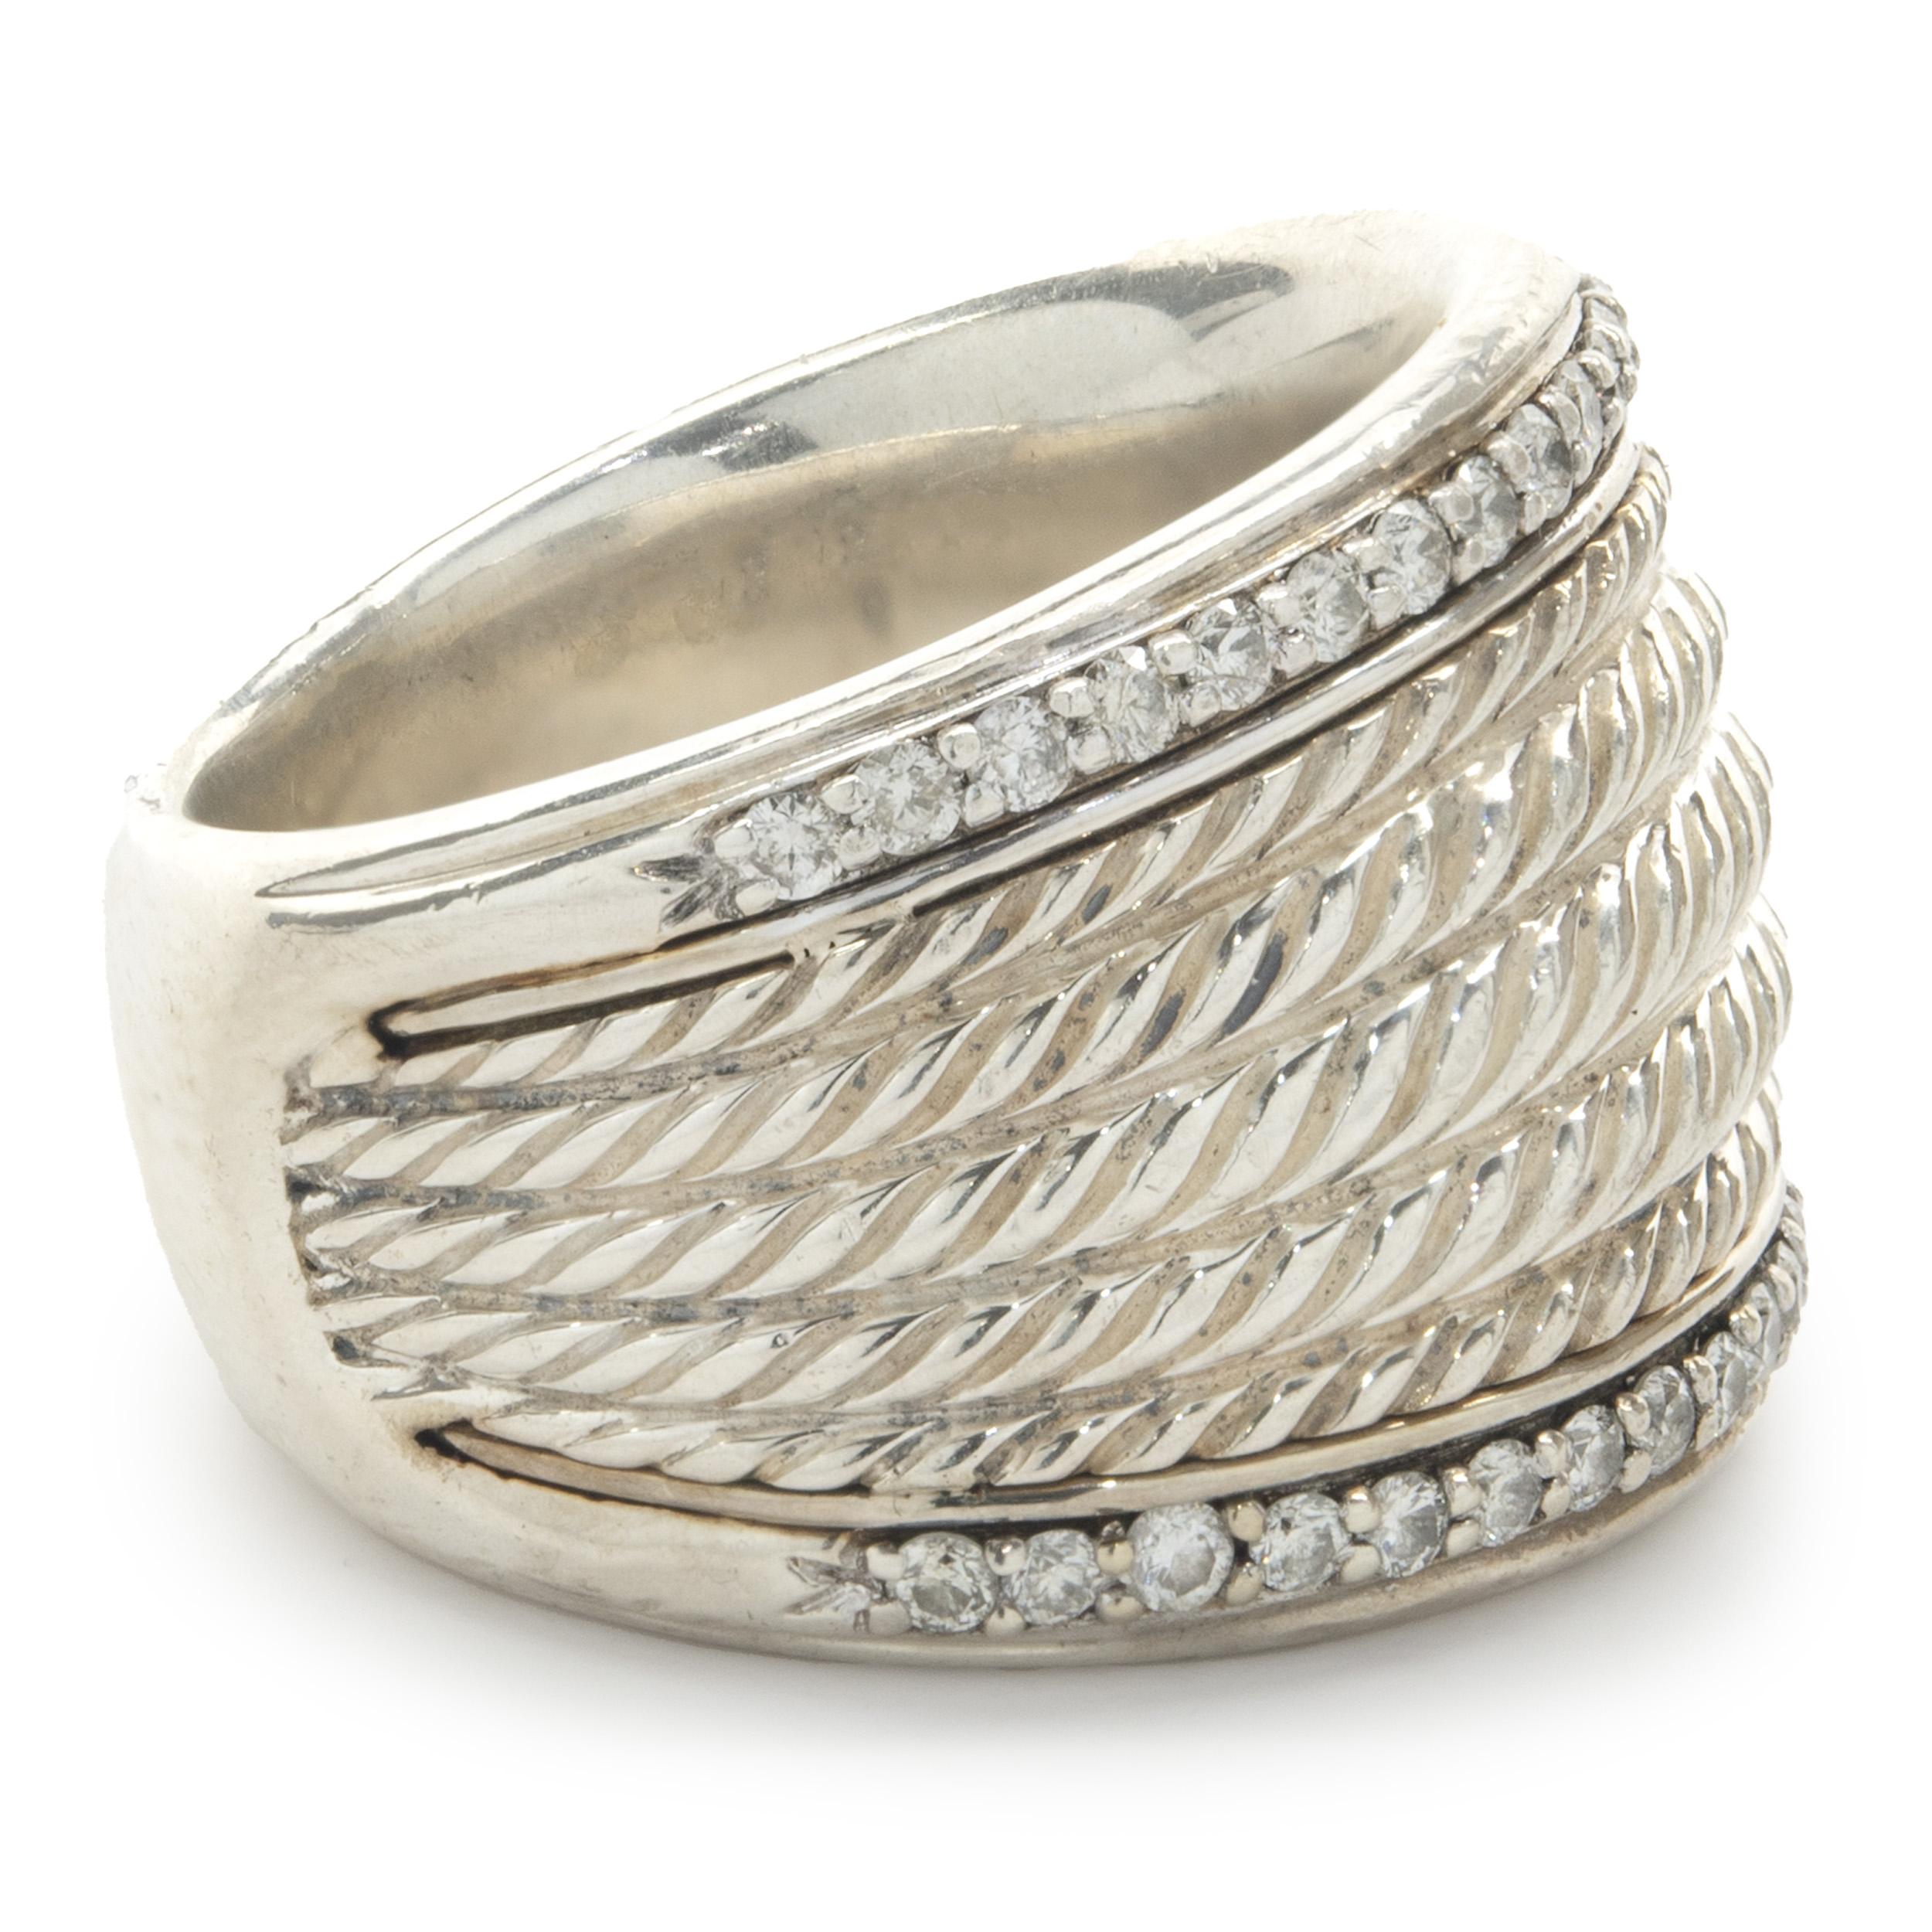 Designer: David Yurman
Material: Sterling Silver
Dimensions: ring measures 17mm wide
Size: 6.75
Weight: 21.38 grams